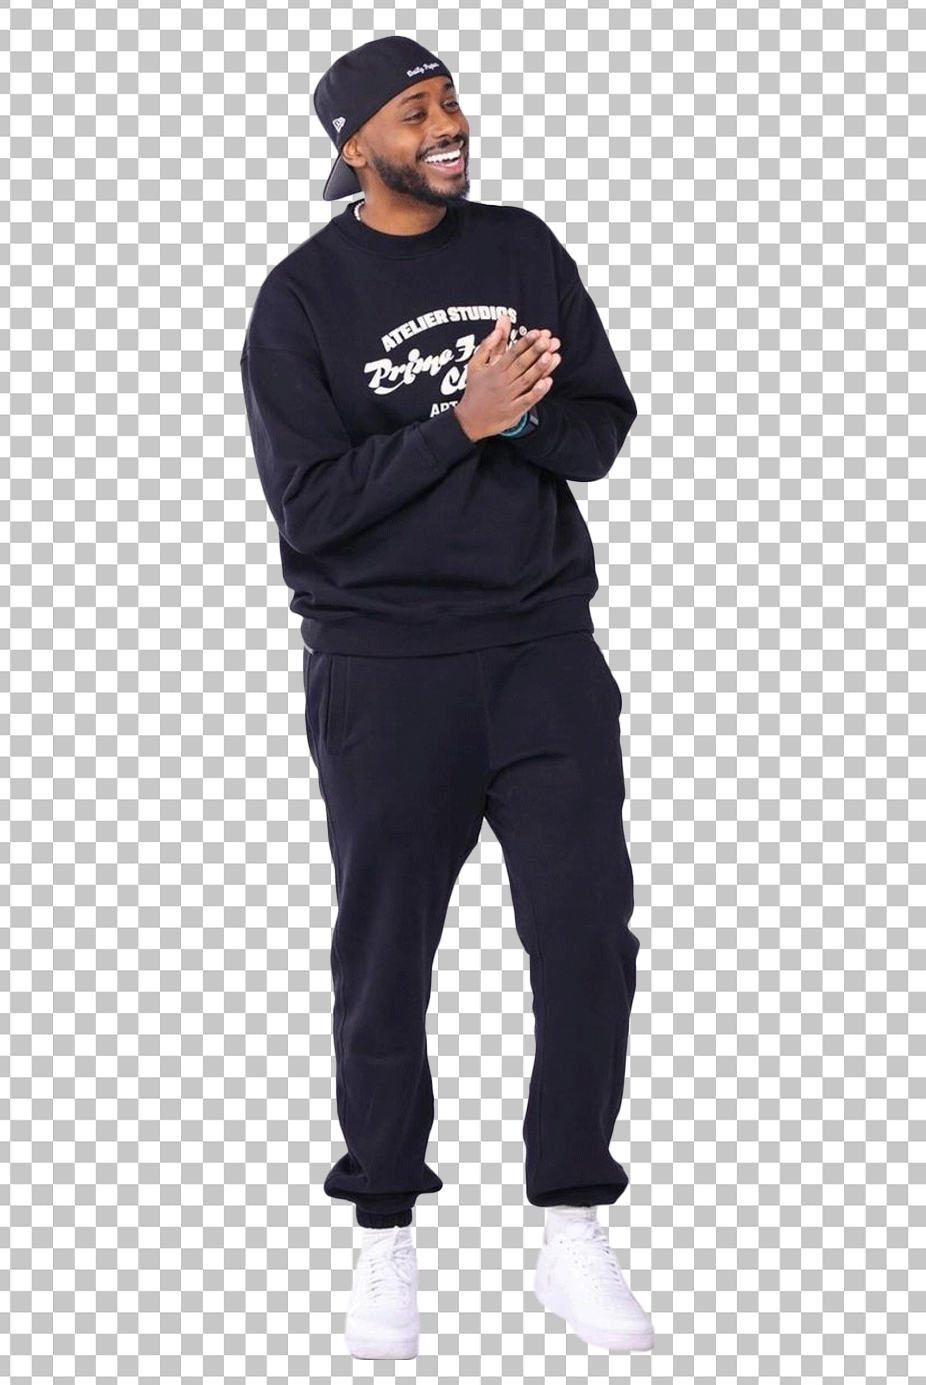 Sharky is wearing a black sweatshirt, white sneakers and happy PNG Image